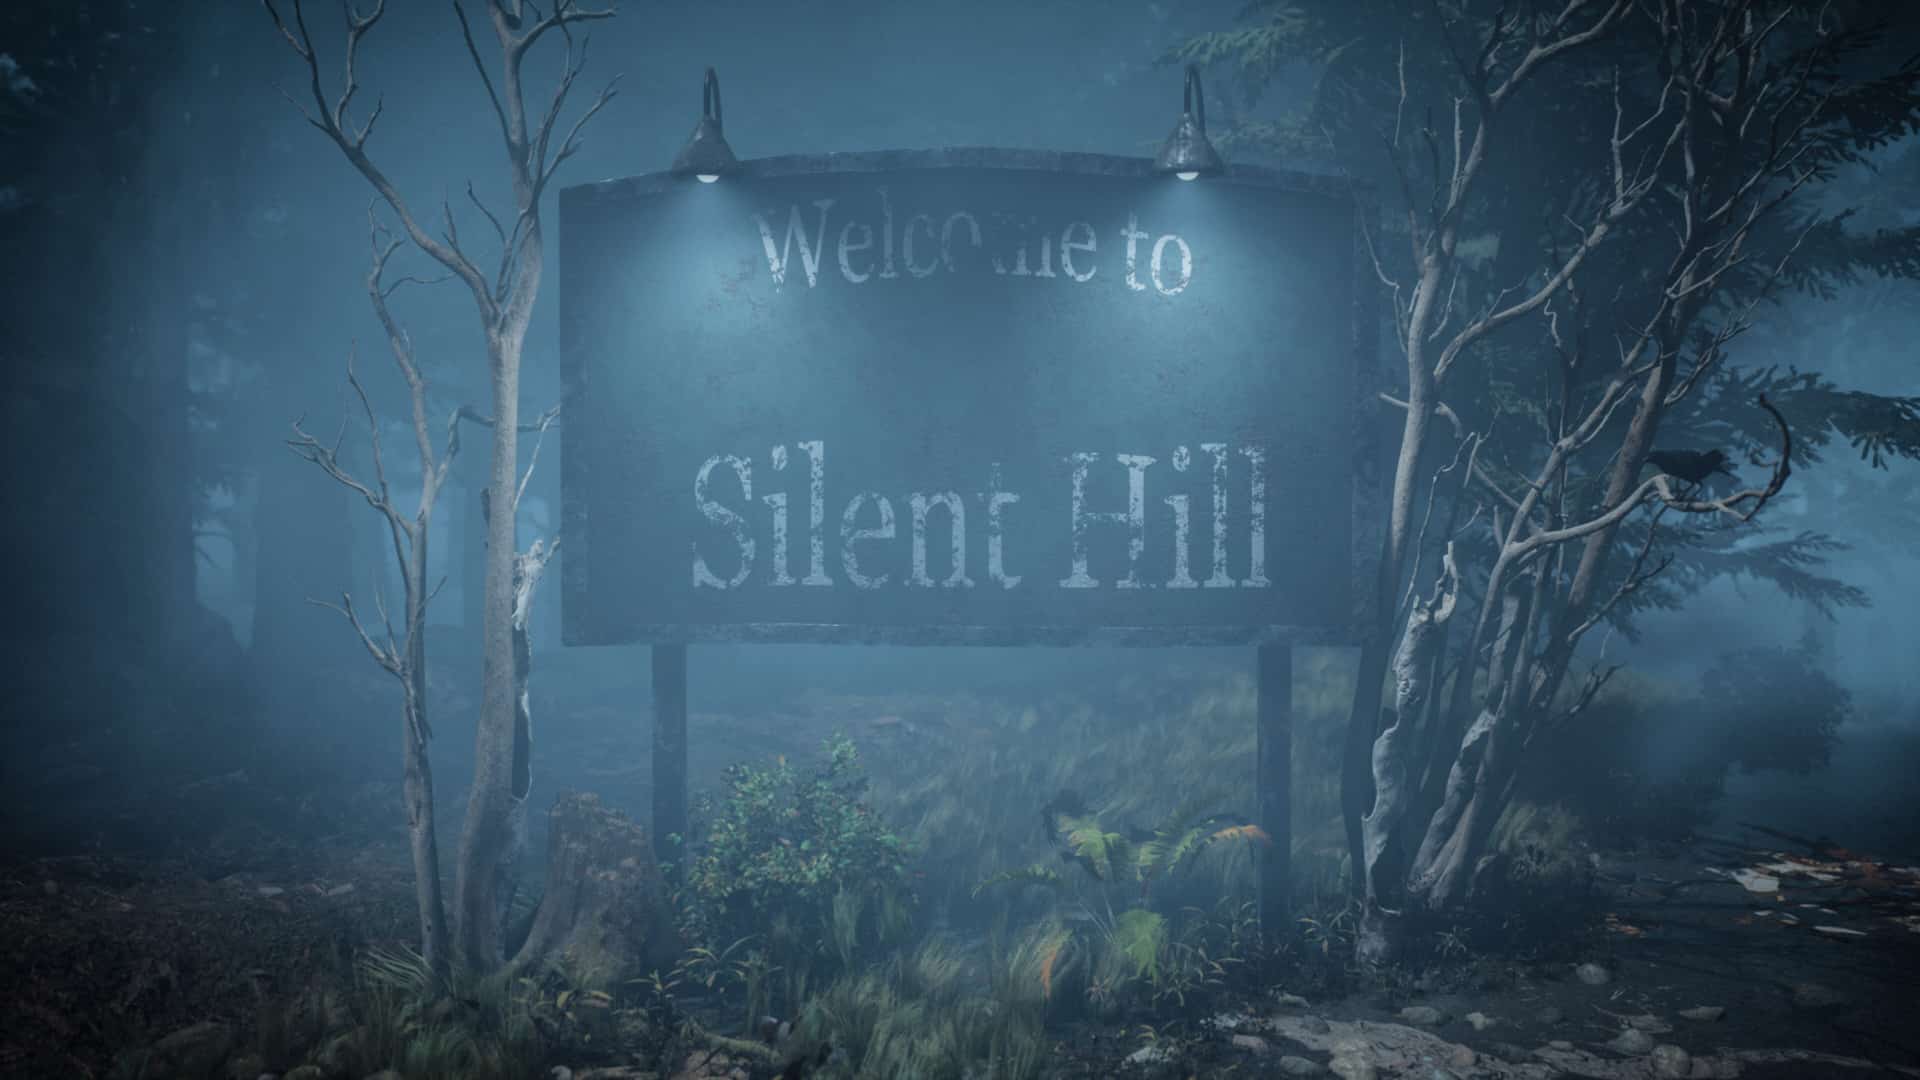 Resident Evil vs Silent Hill  - Silent Hill makes you feel alone in every entry